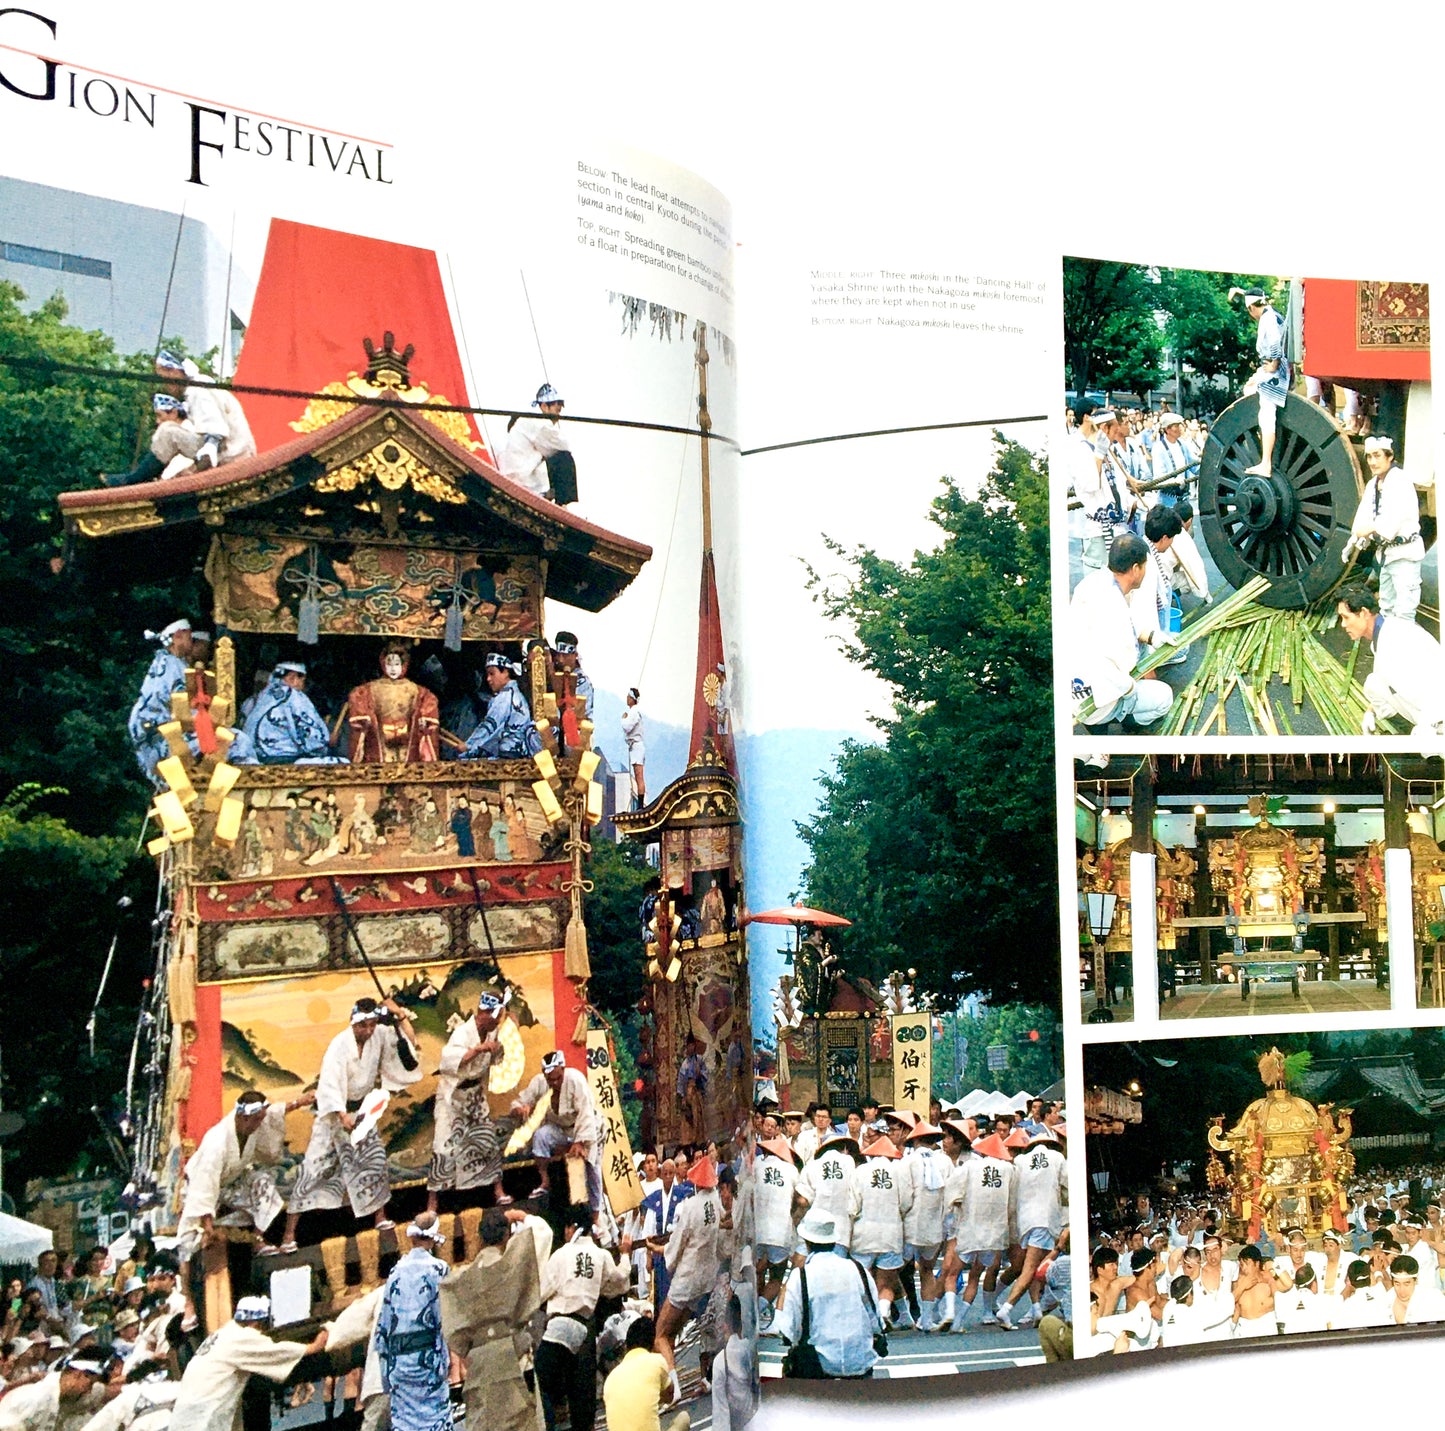 The Great Festivals of Japan: Spectacle and Spirit